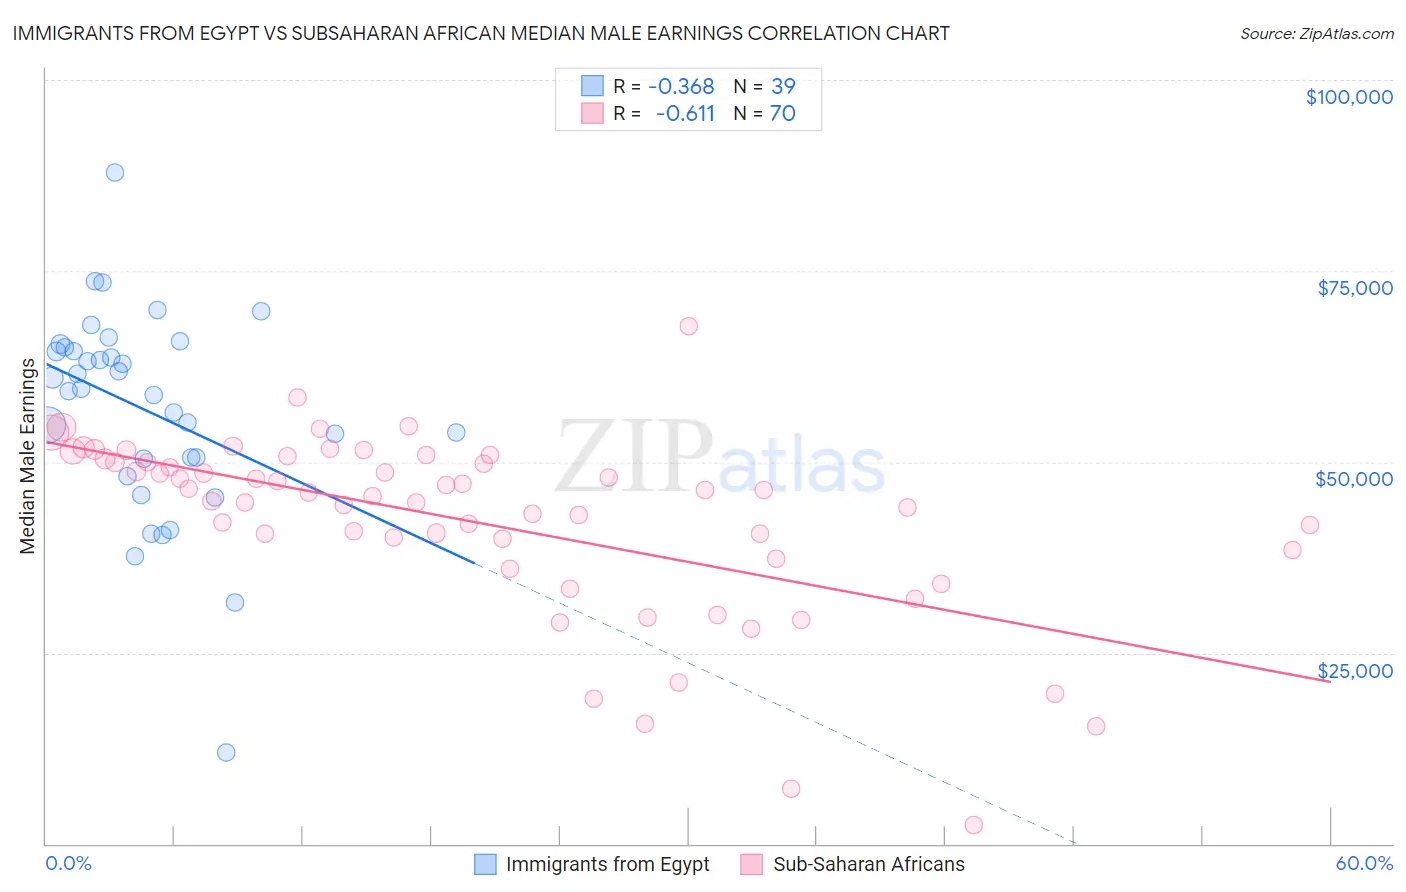 Immigrants from Egypt vs Subsaharan African Median Male Earnings